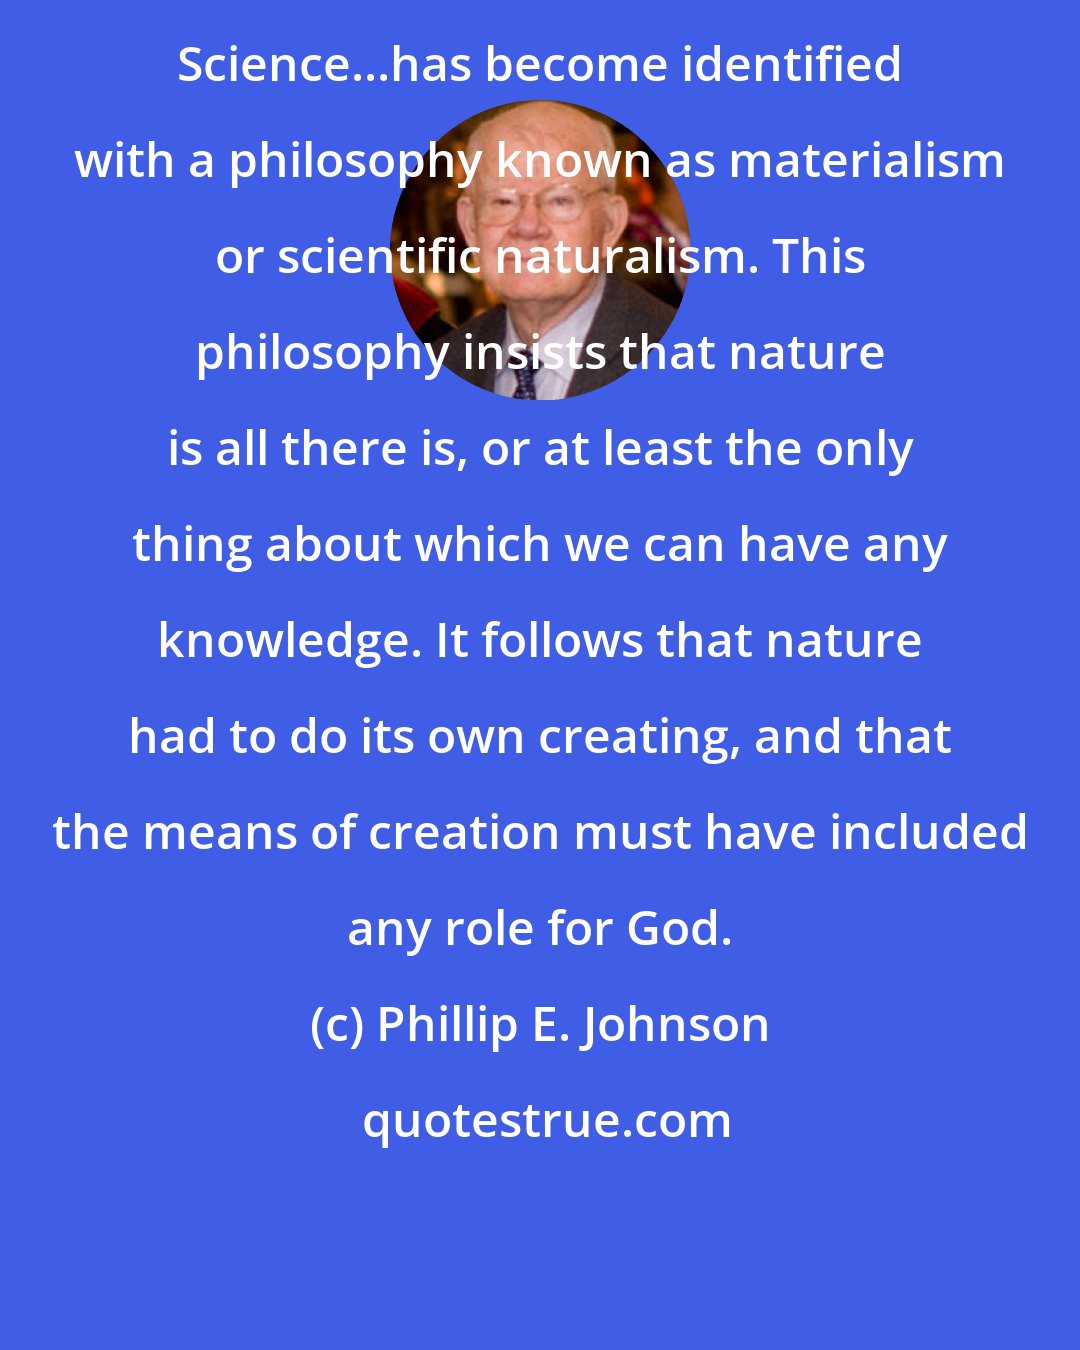 Phillip E. Johnson: Science...has become identified with a philosophy known as materialism or scientific naturalism. This philosophy insists that nature is all there is, or at least the only thing about which we can have any knowledge. It follows that nature had to do its own creating, and that the means of creation must have included any role for God.